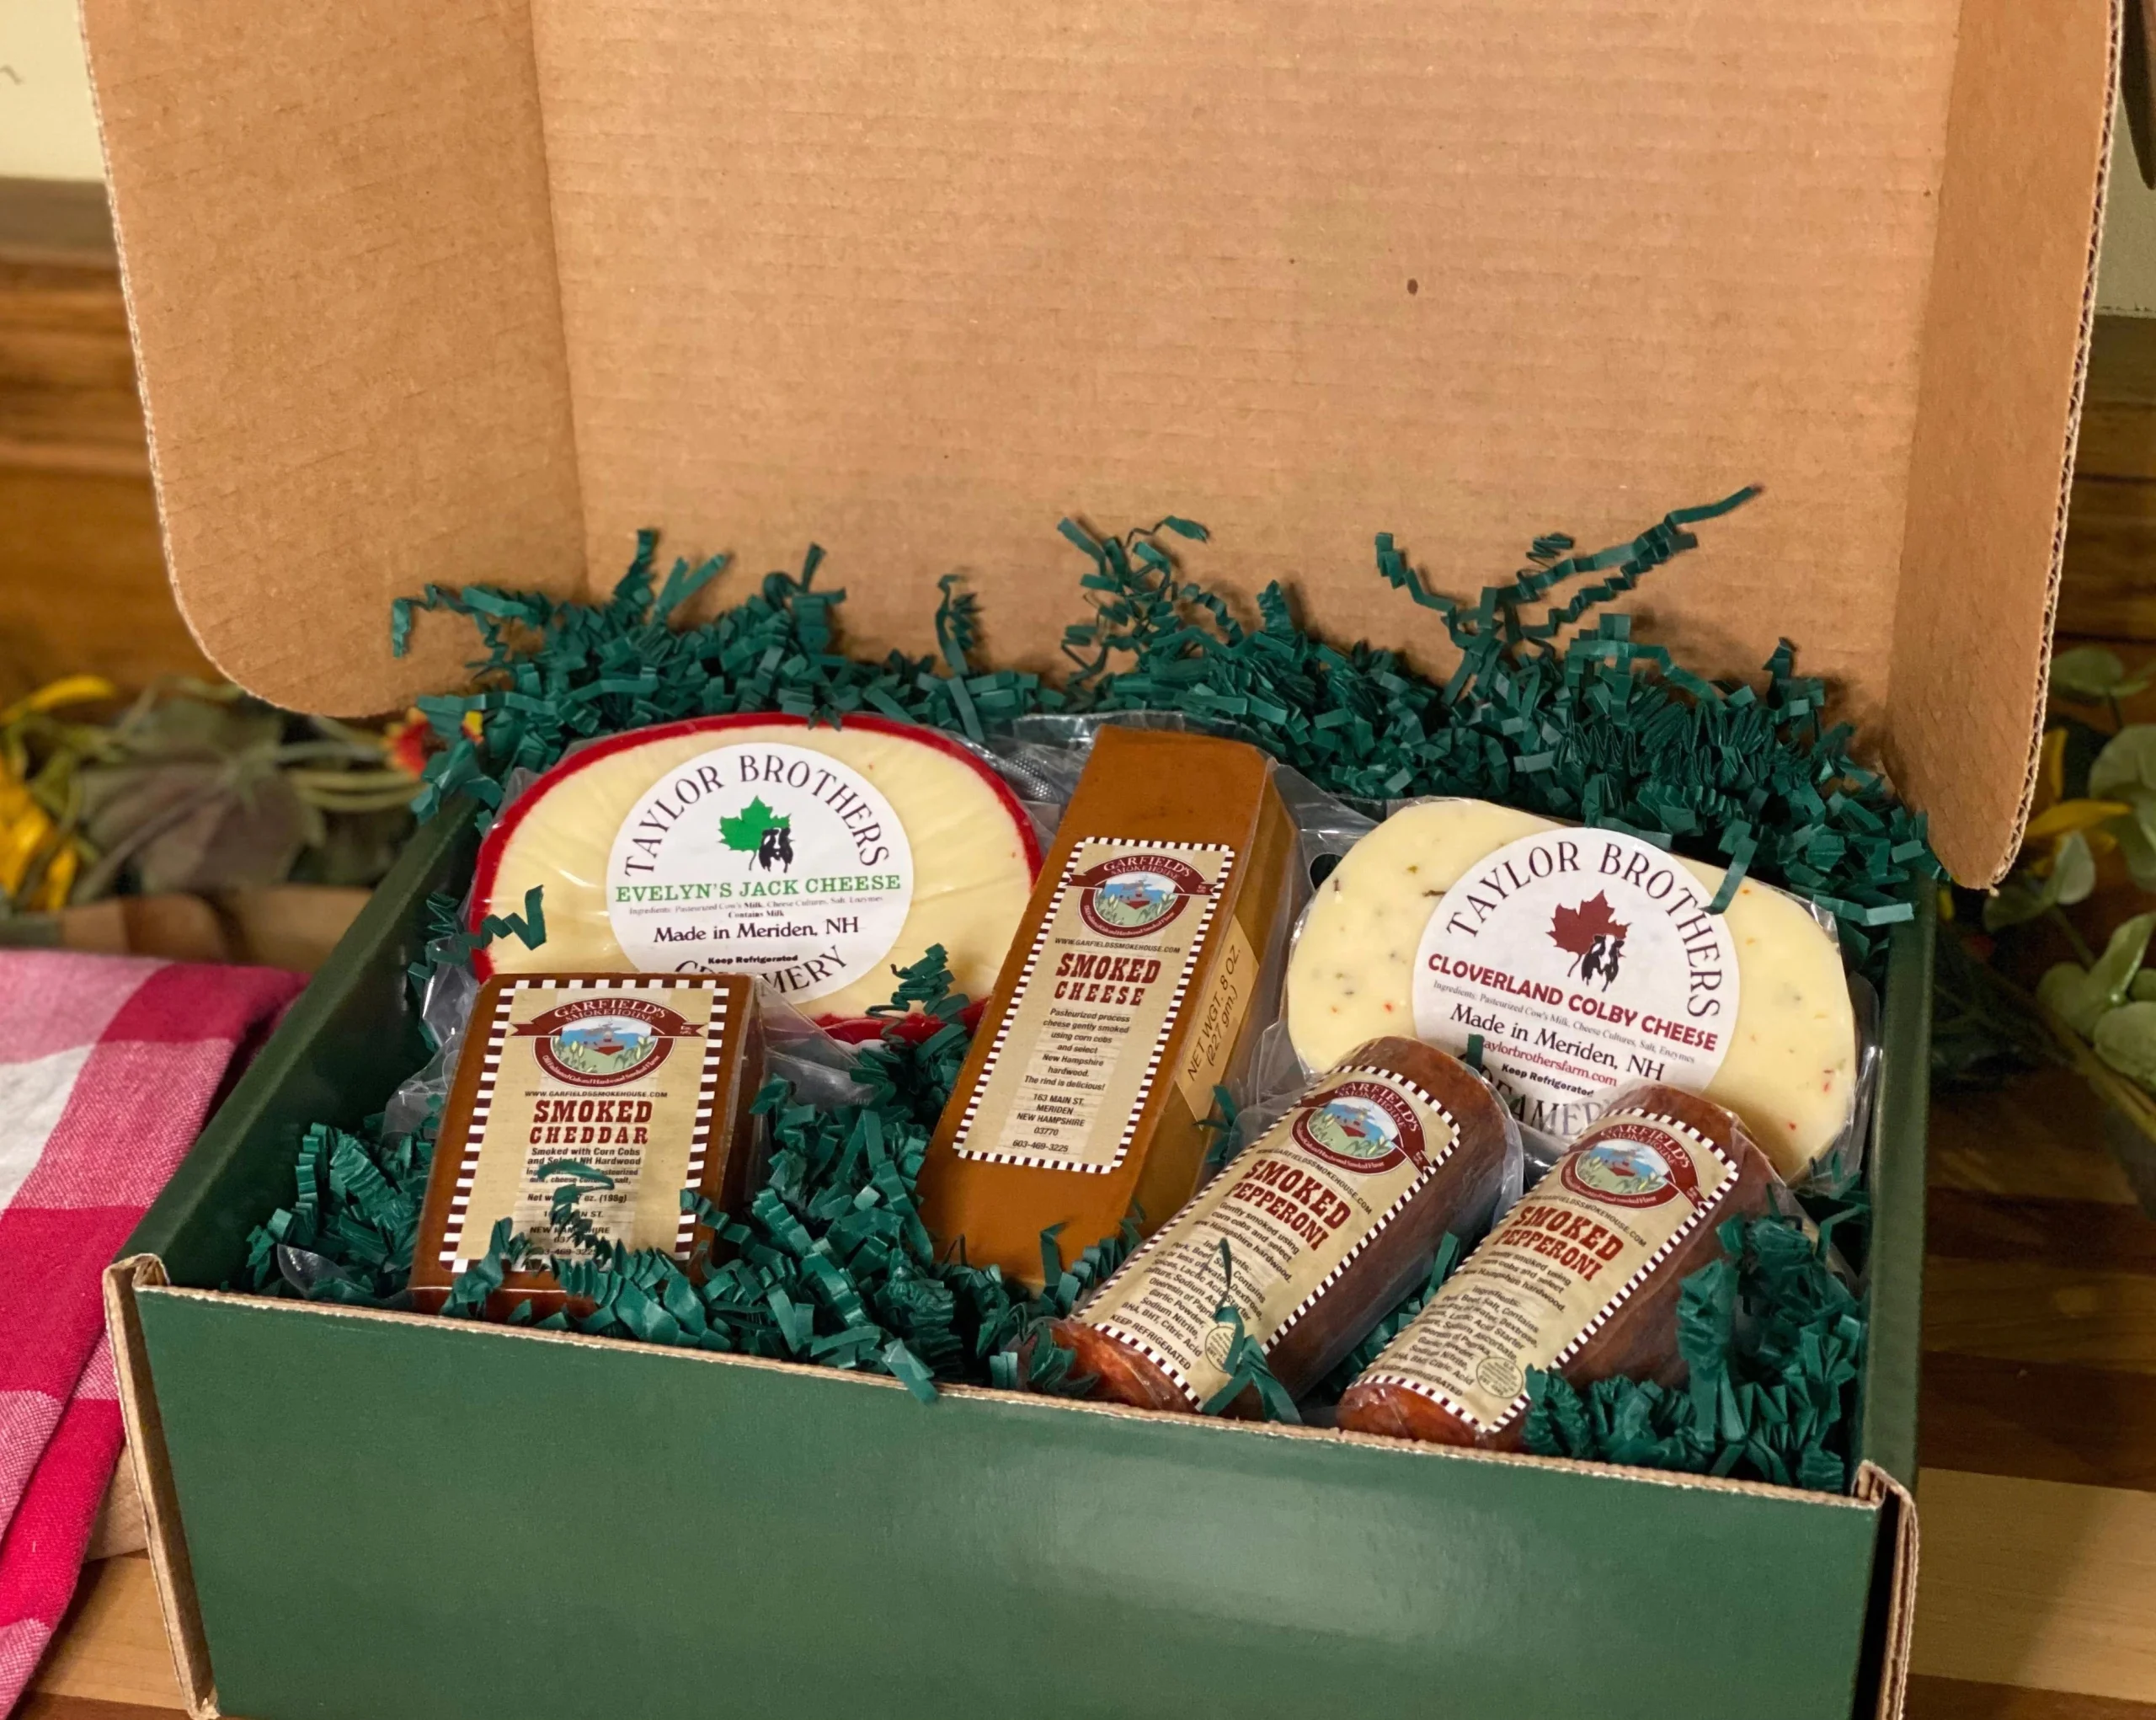 smoked cheese gift baskets - What kind of cheese can you put in a gift basket